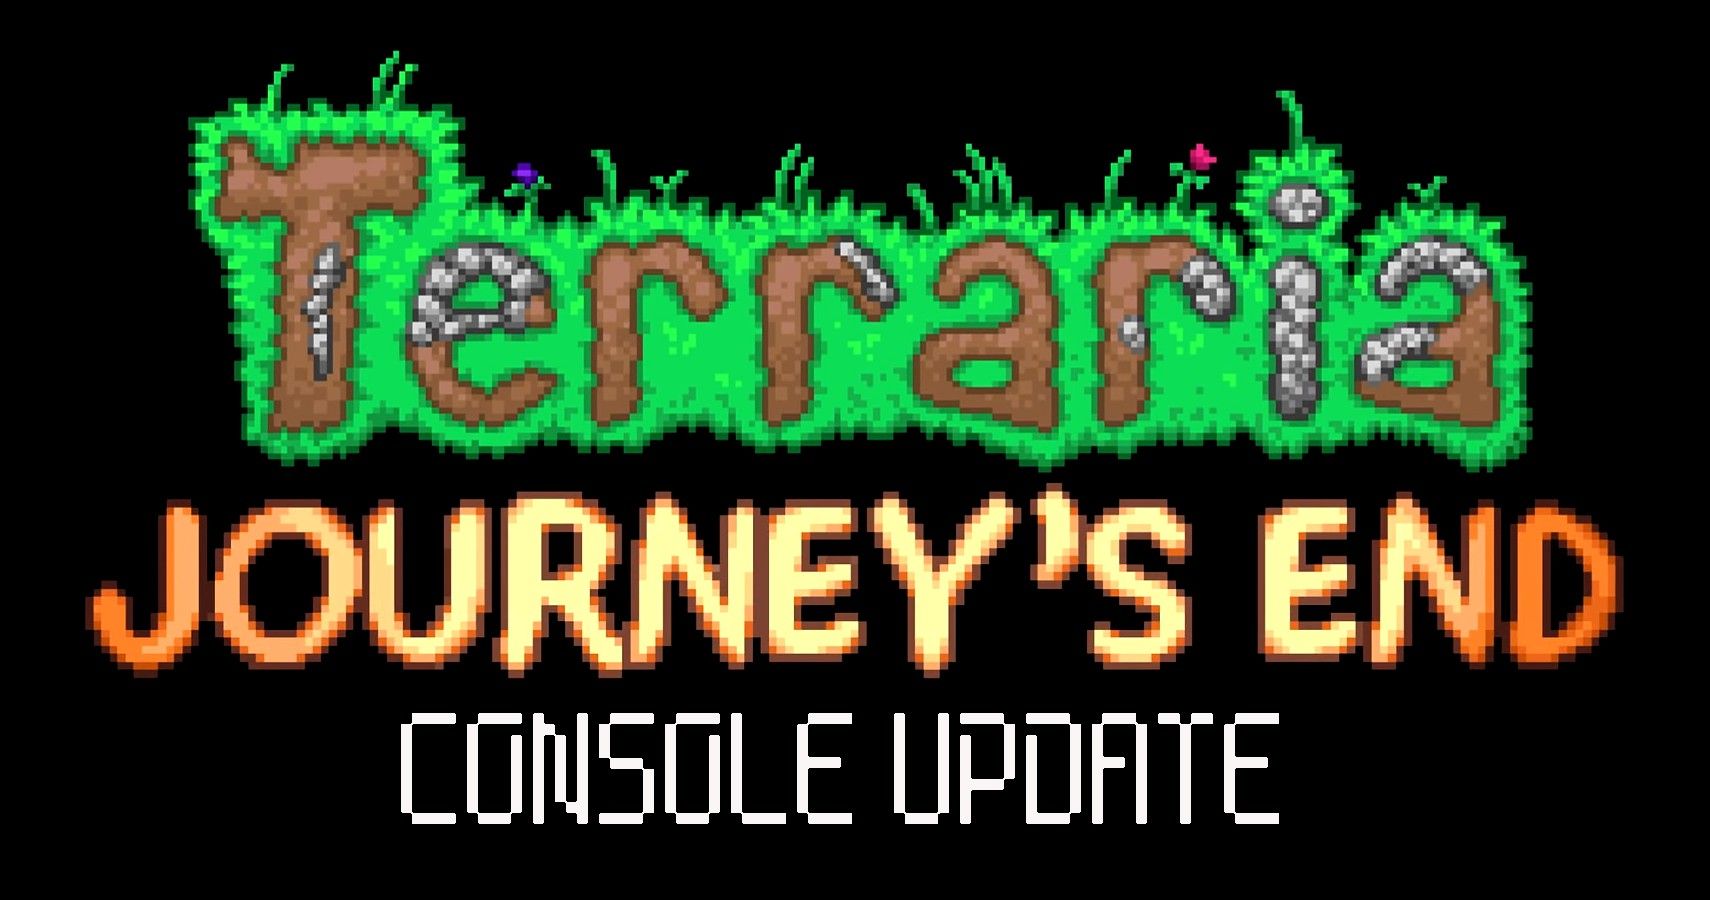 Does Terraria Support Cross-platform Play? All You Need to Know